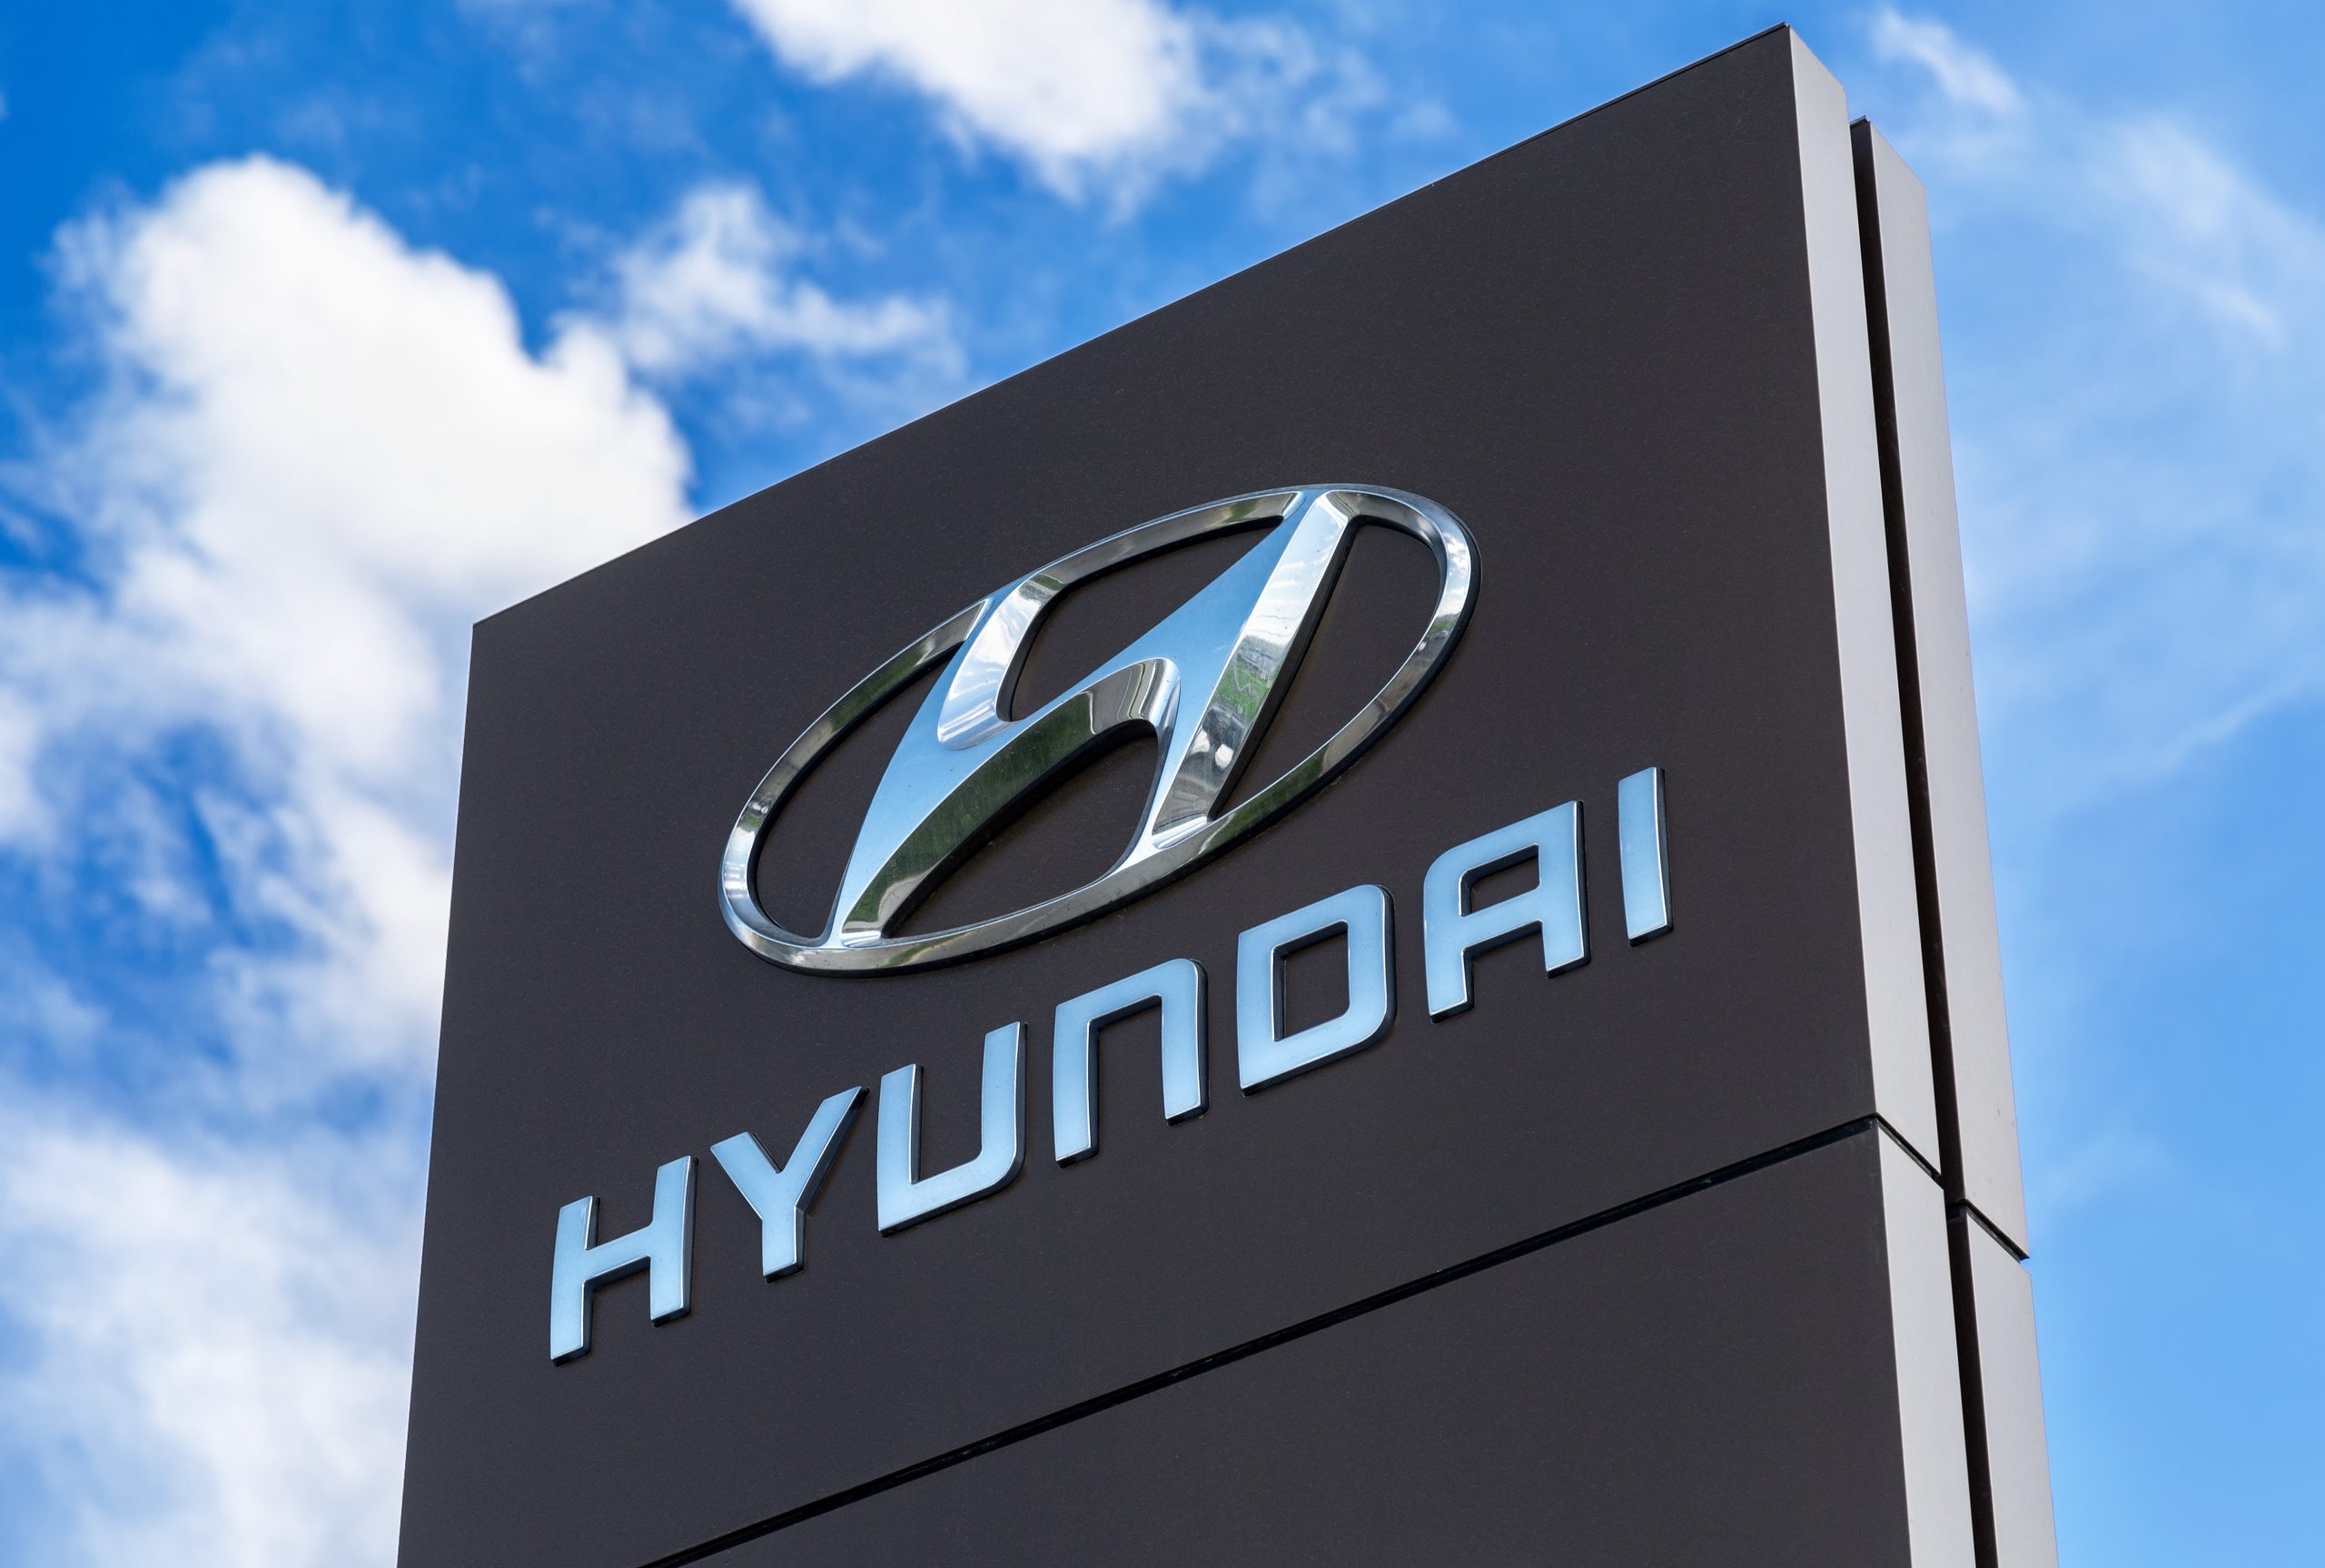 A class action lawsuit claims multiple Hyundai models have malfunctioning oil pumps that present a “massive fire risk.”